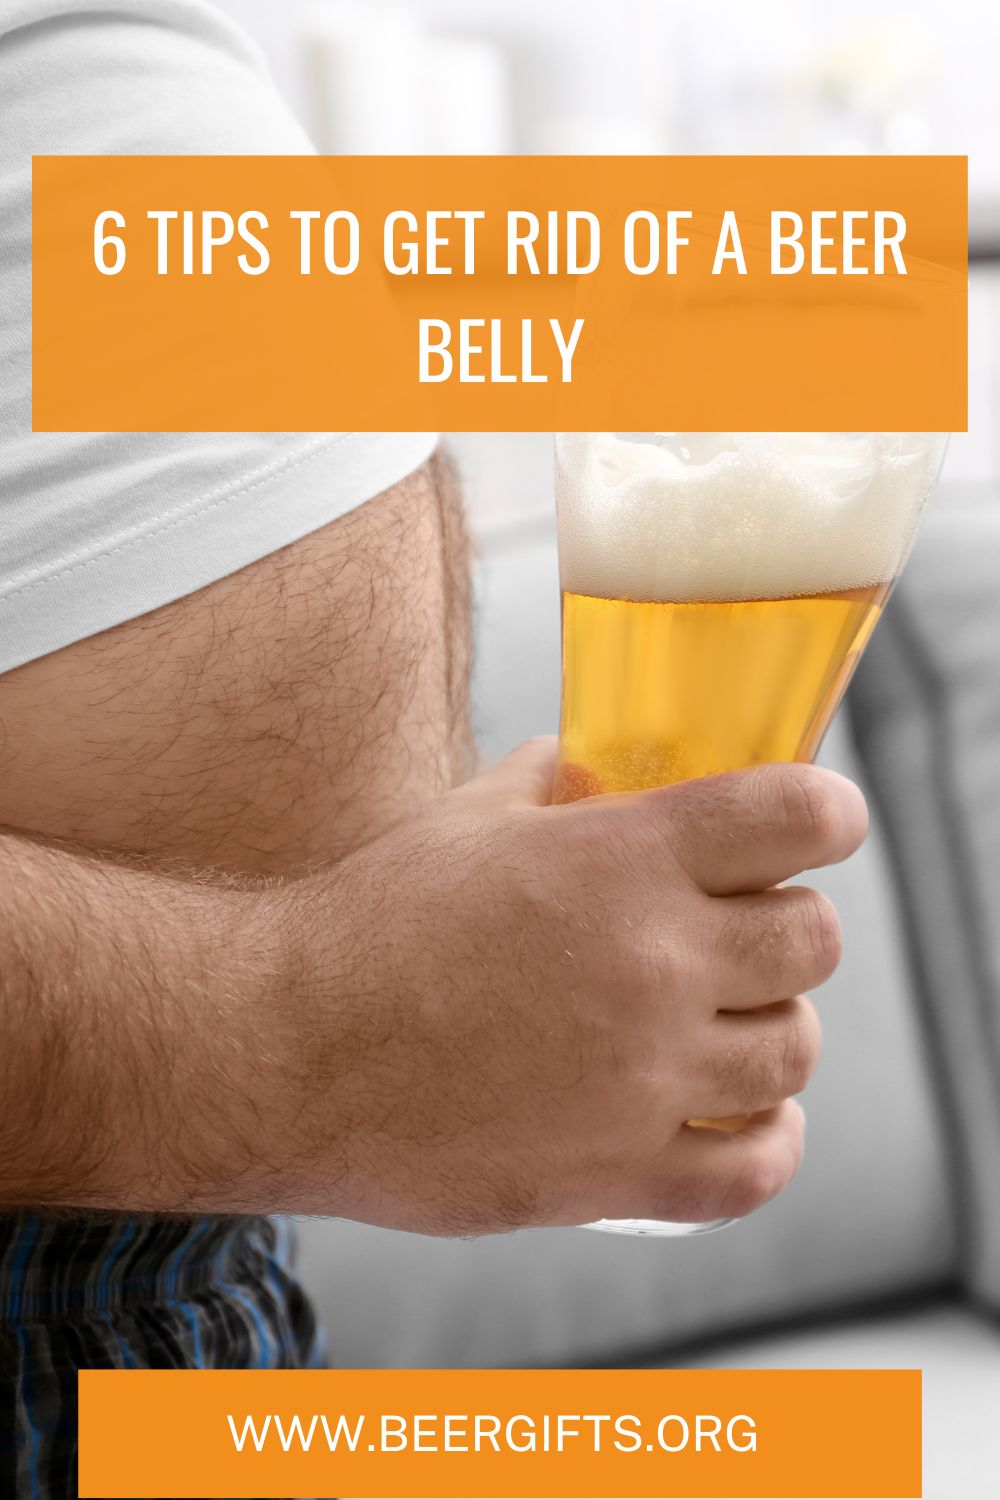 6 Tips to Get Rid of a Beer Belly1